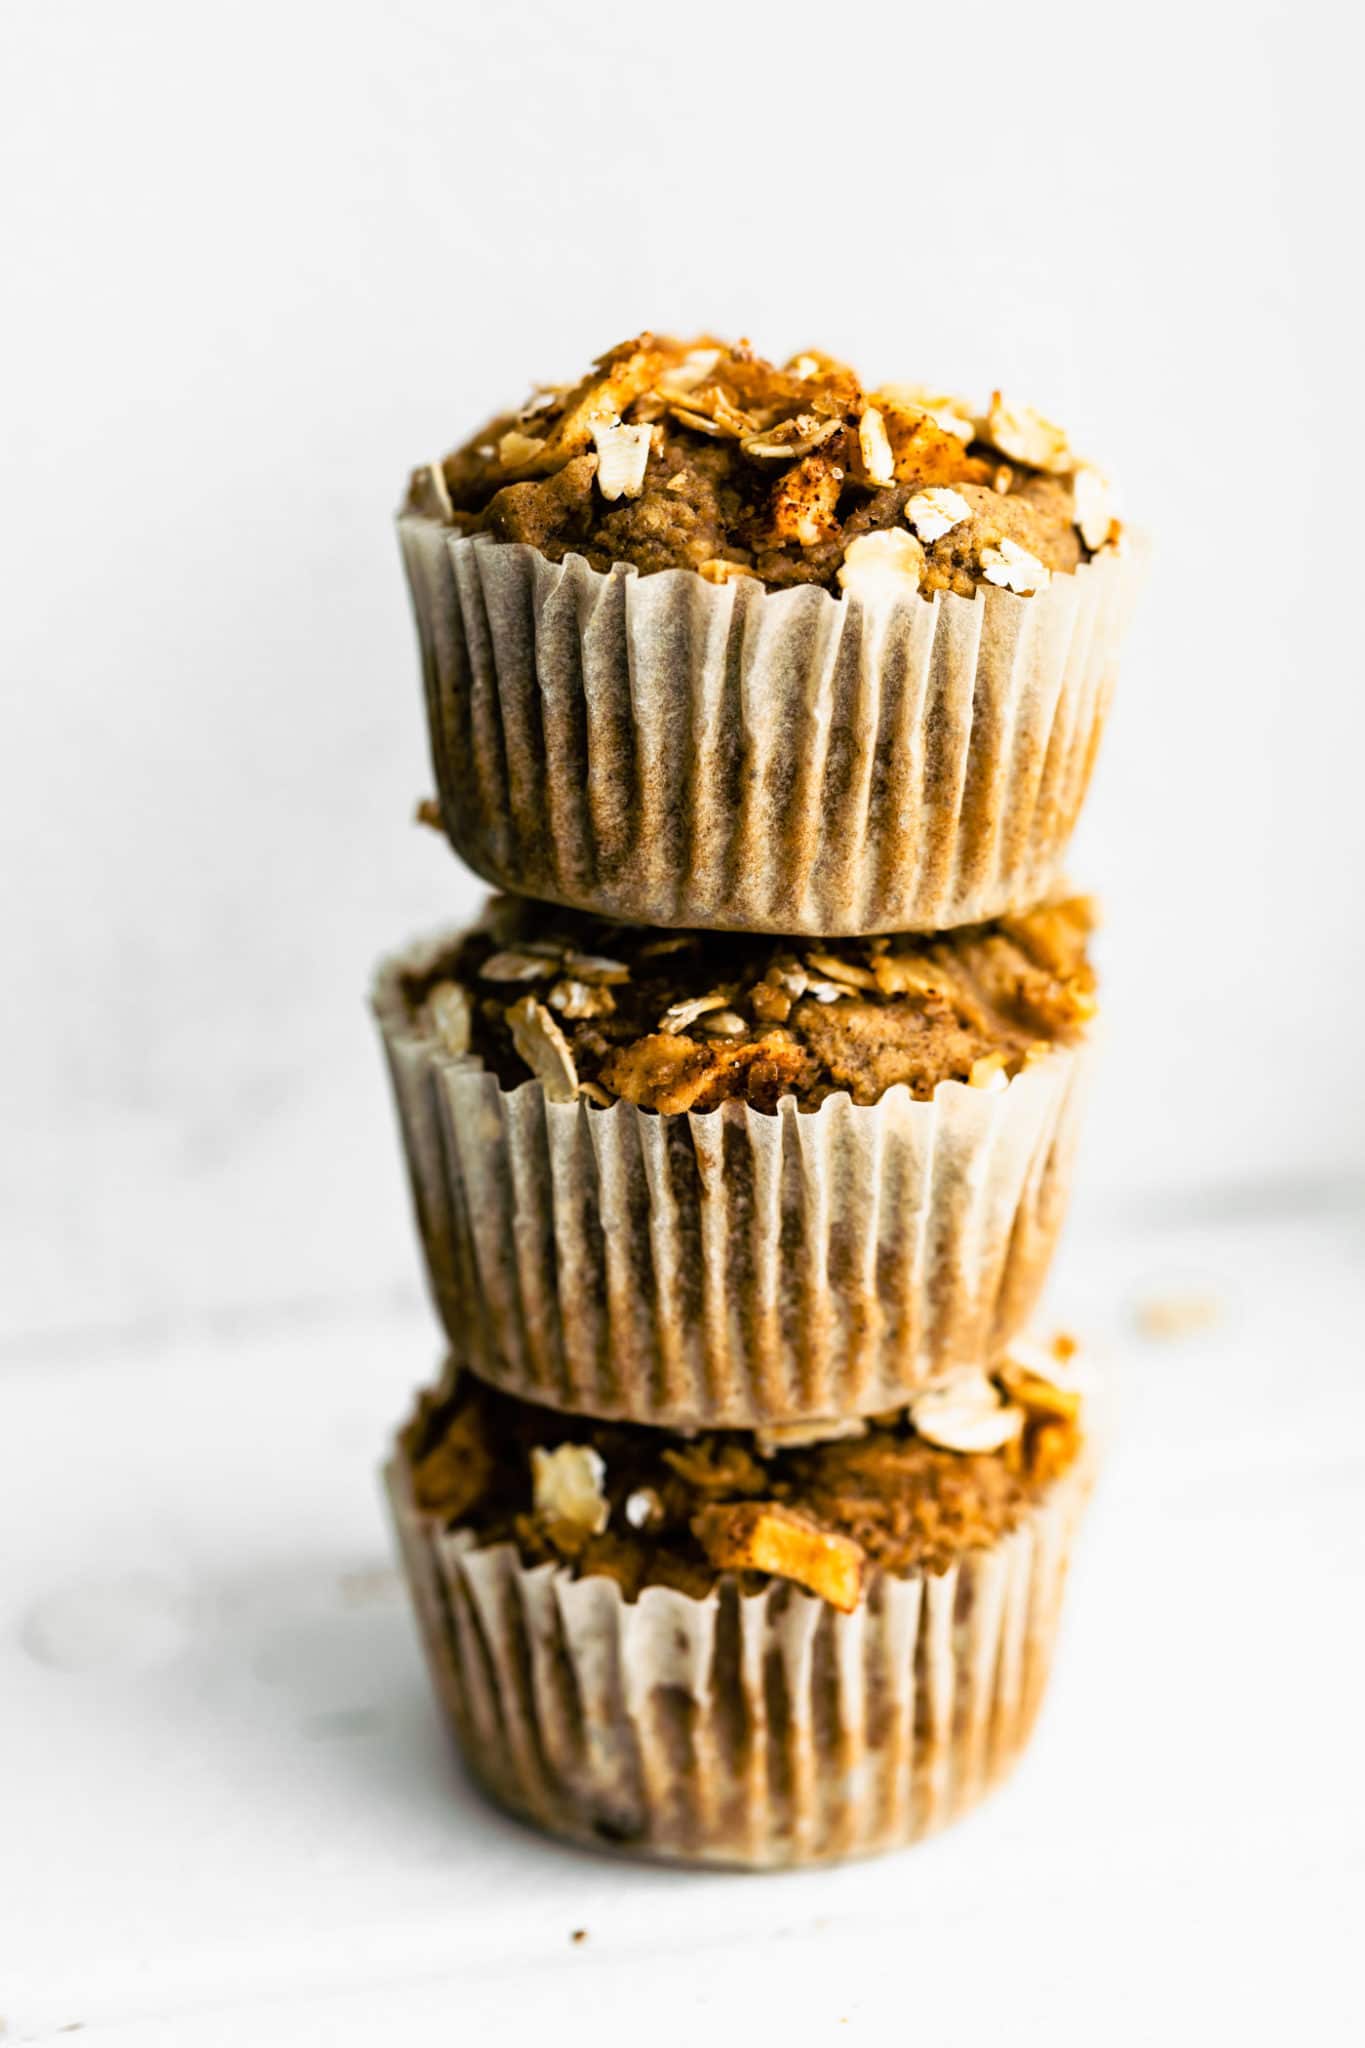 3 gluten free applesauce muffins stacked on top of each other